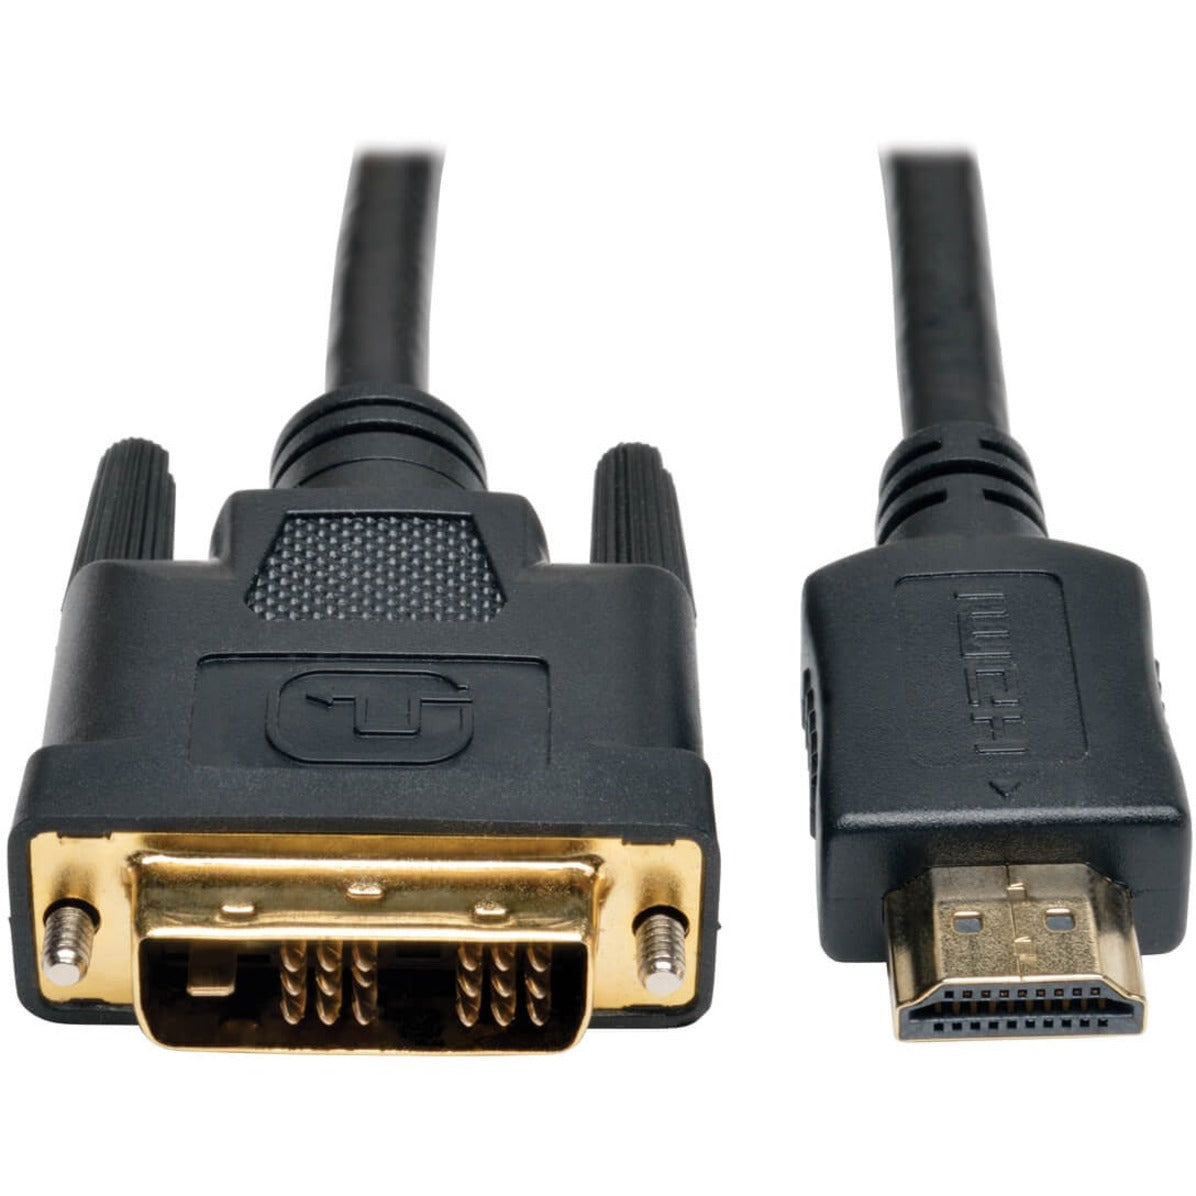 Tripp Lite P566-020 HDMI to DVI Cable, 20-ft, EMI/RF Protection, Gold-Plated Connectors